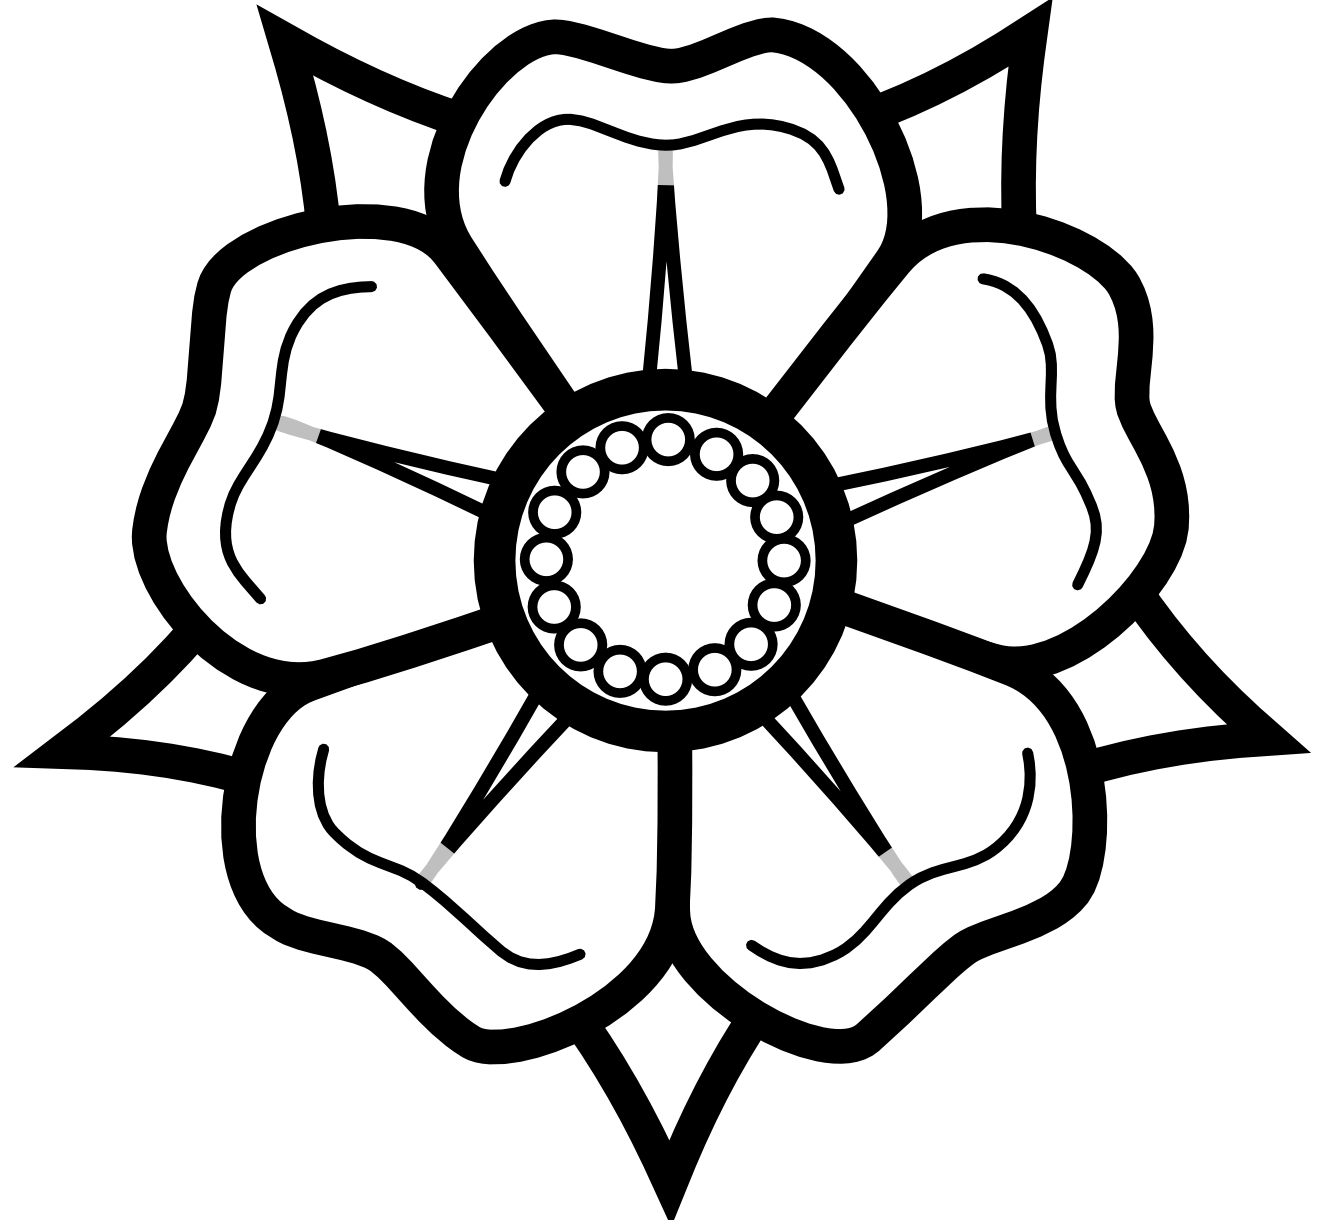 Black and White Rose Logo - Free Drawings Of Flowers In Black And White, Download Free Clip Art